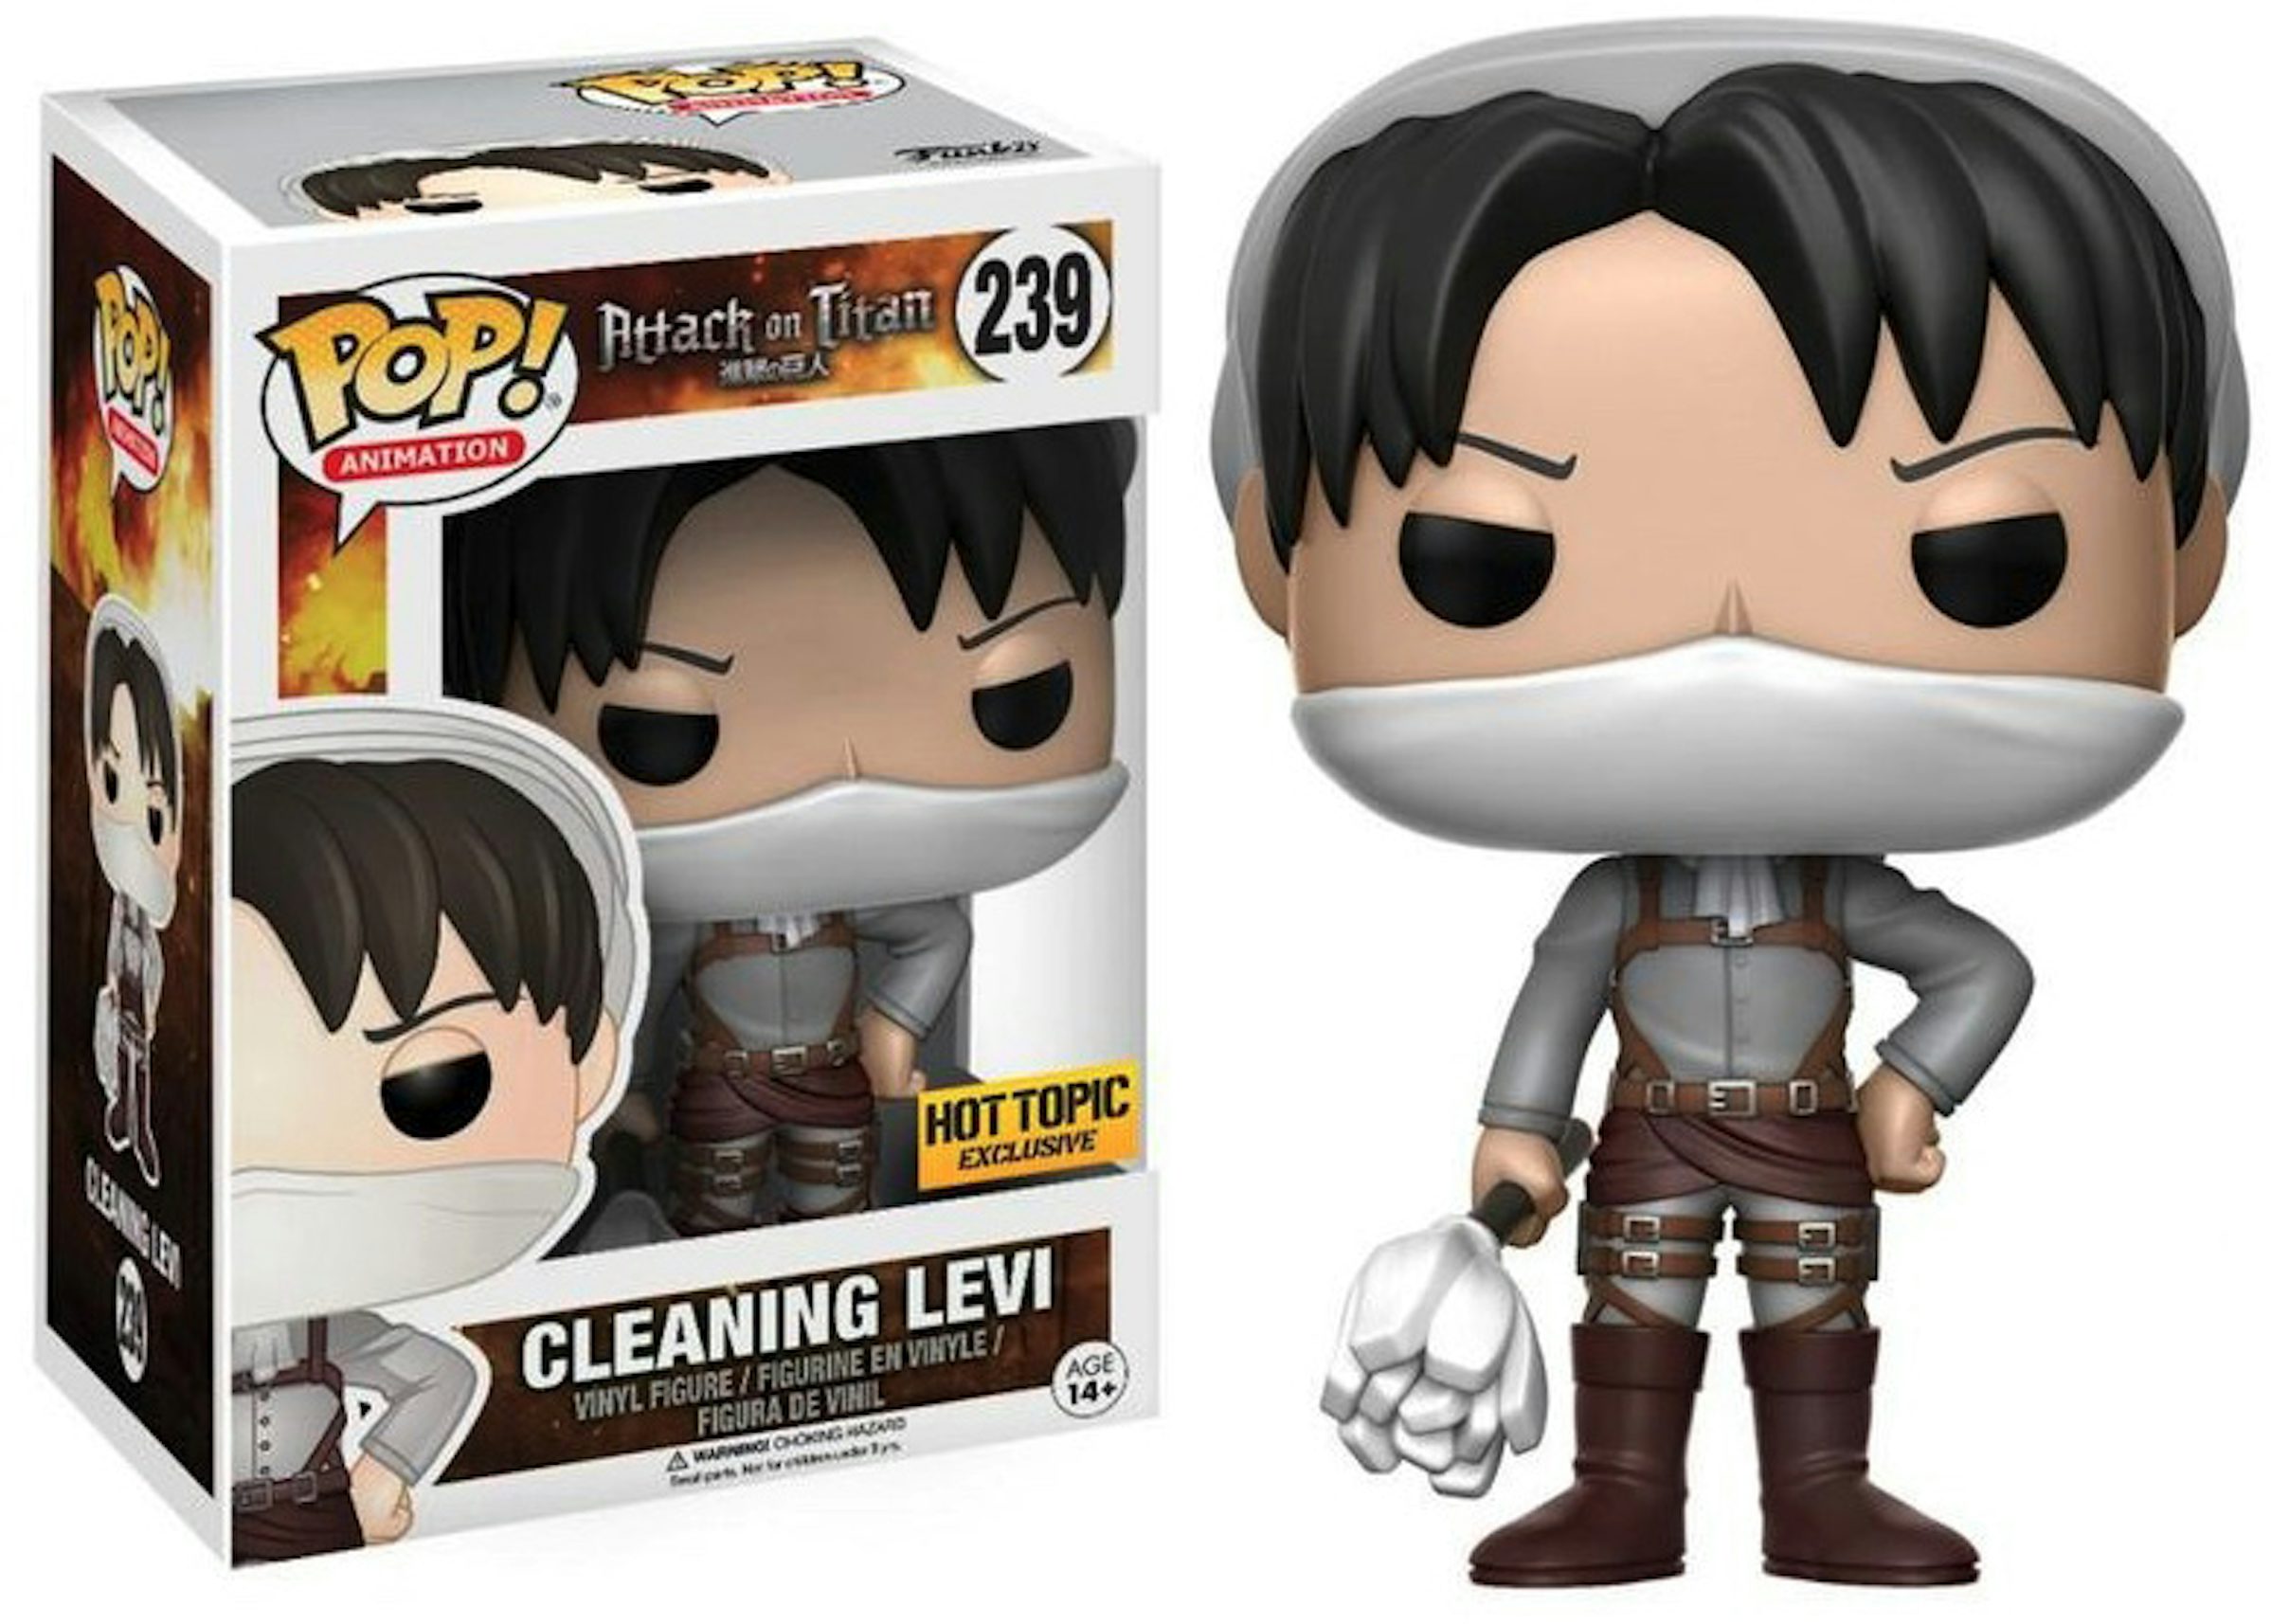 Funko Pop! Animation Attack on Titan Cleaning Levi Hot Topic Exclusive  Figure #239